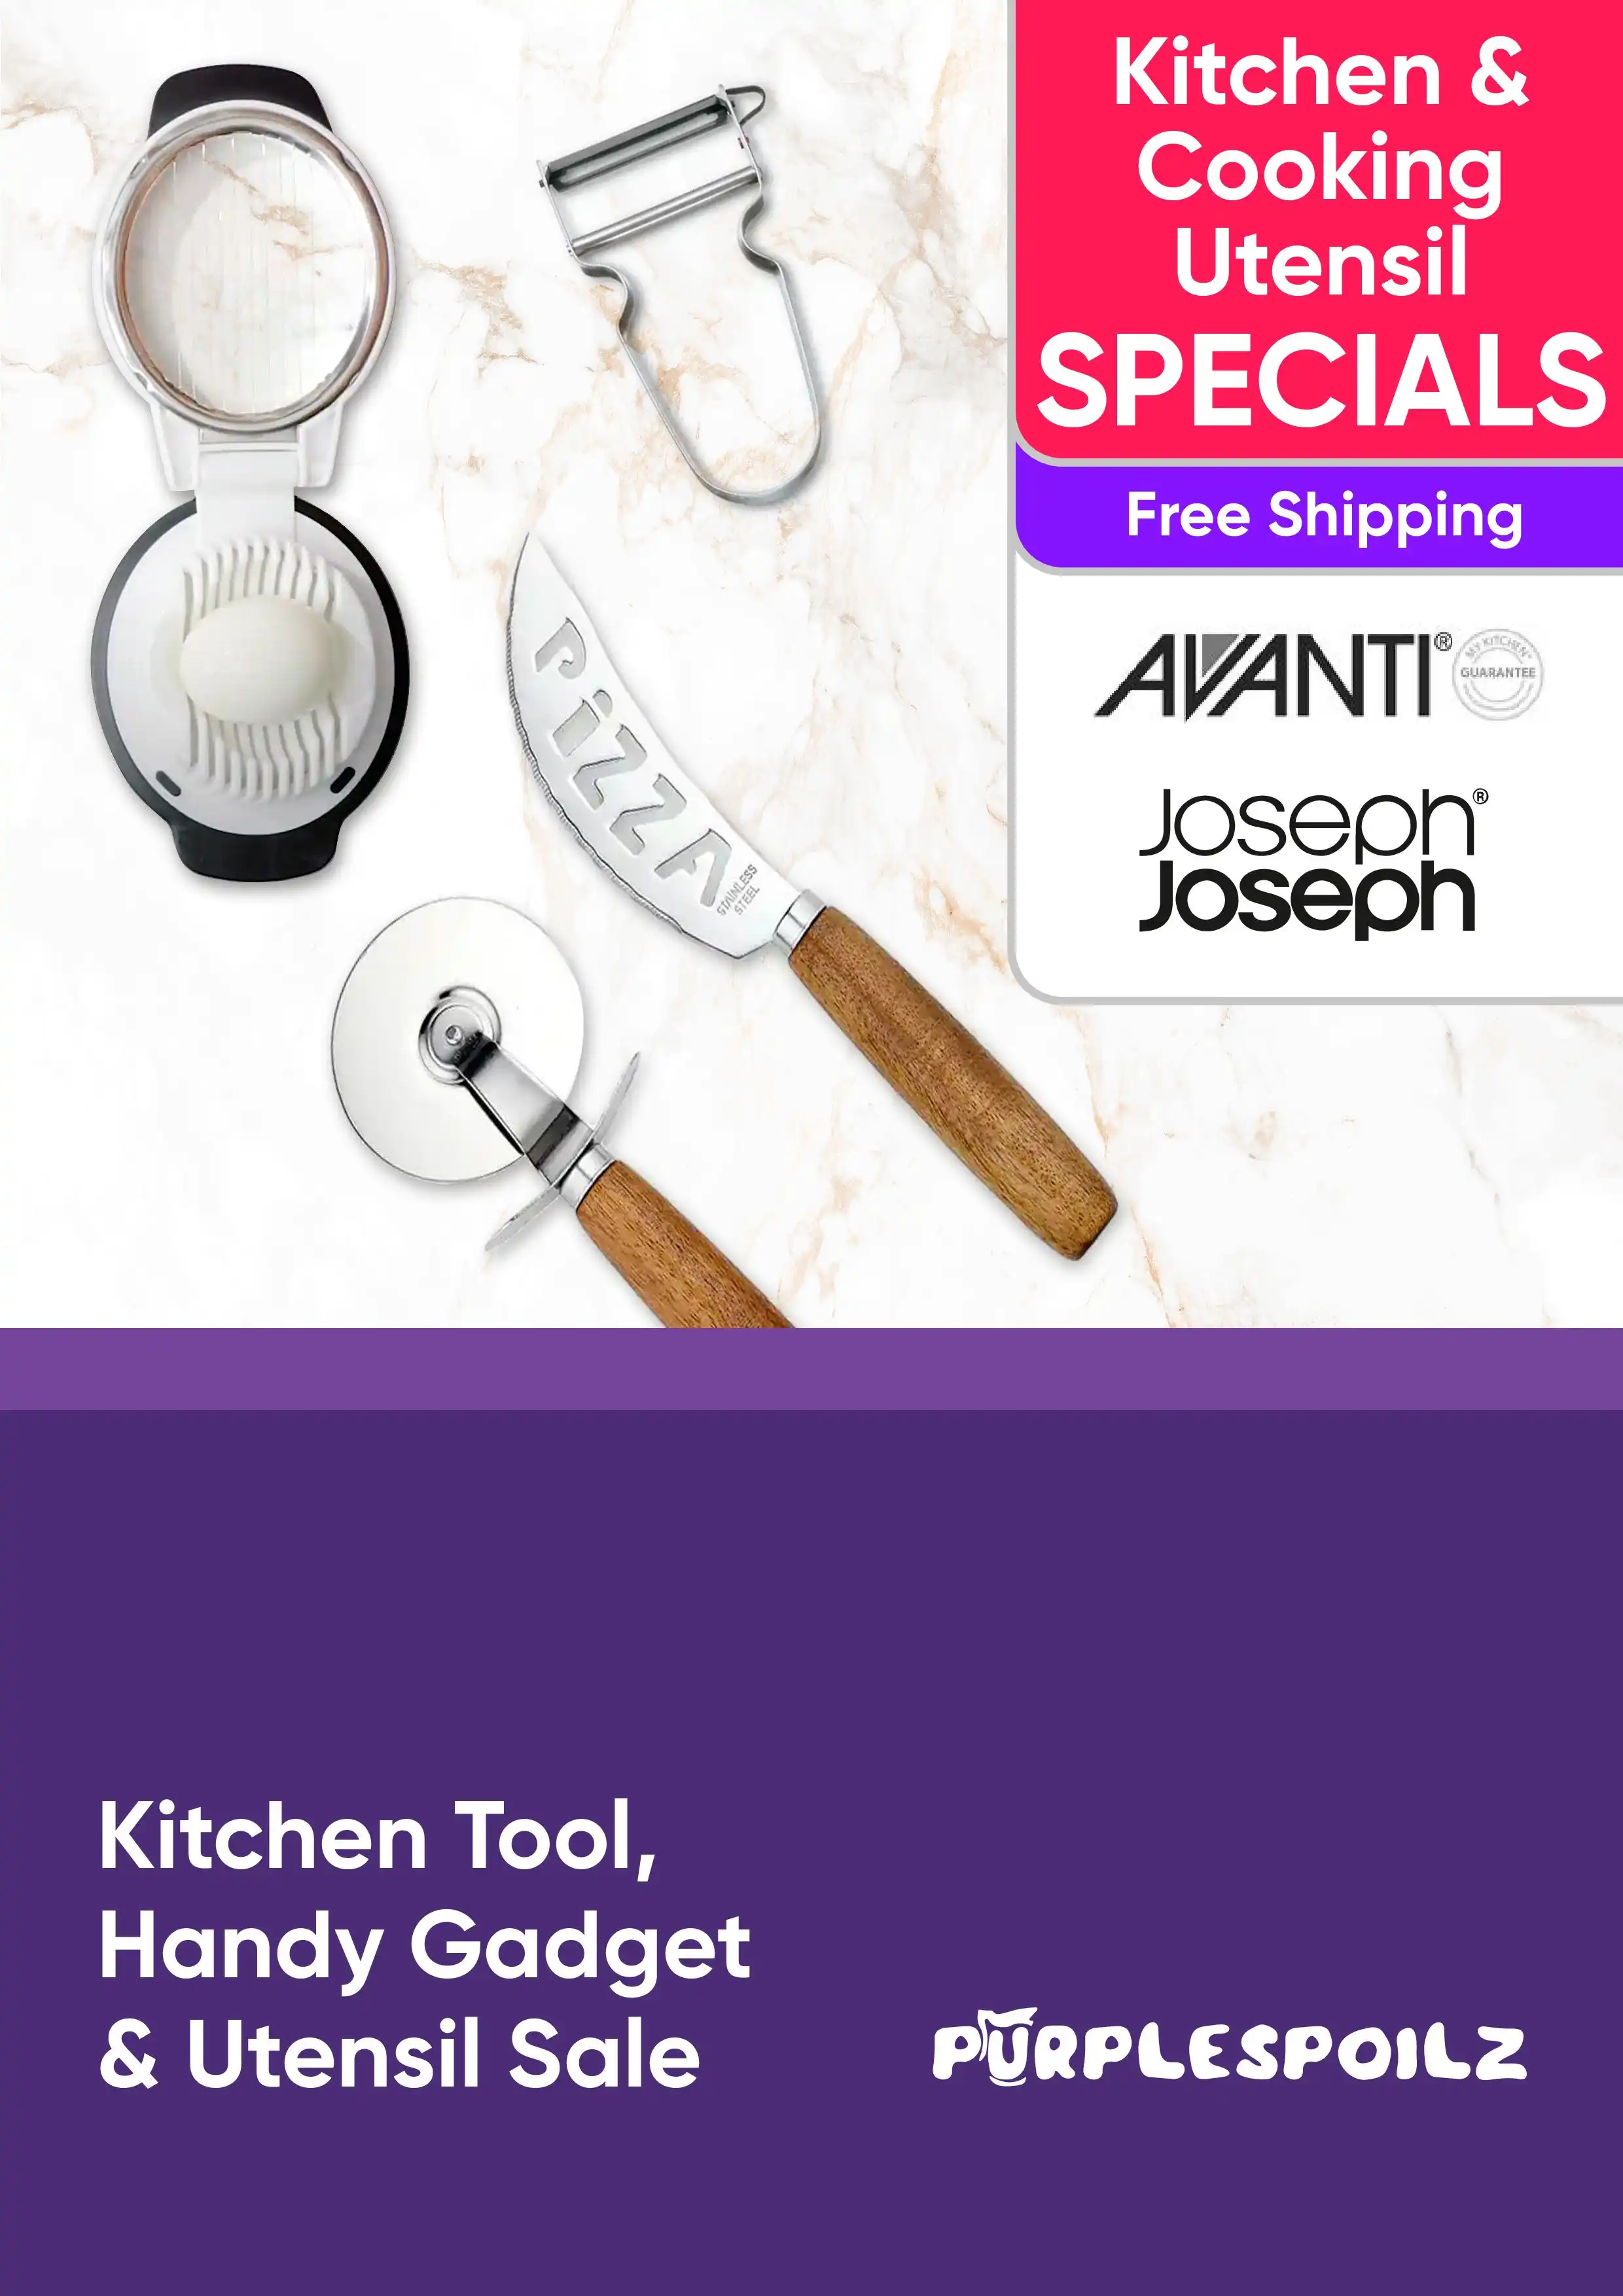 Kitchen Tool, Handy Gadget and Utensil Sale - Free Shipping